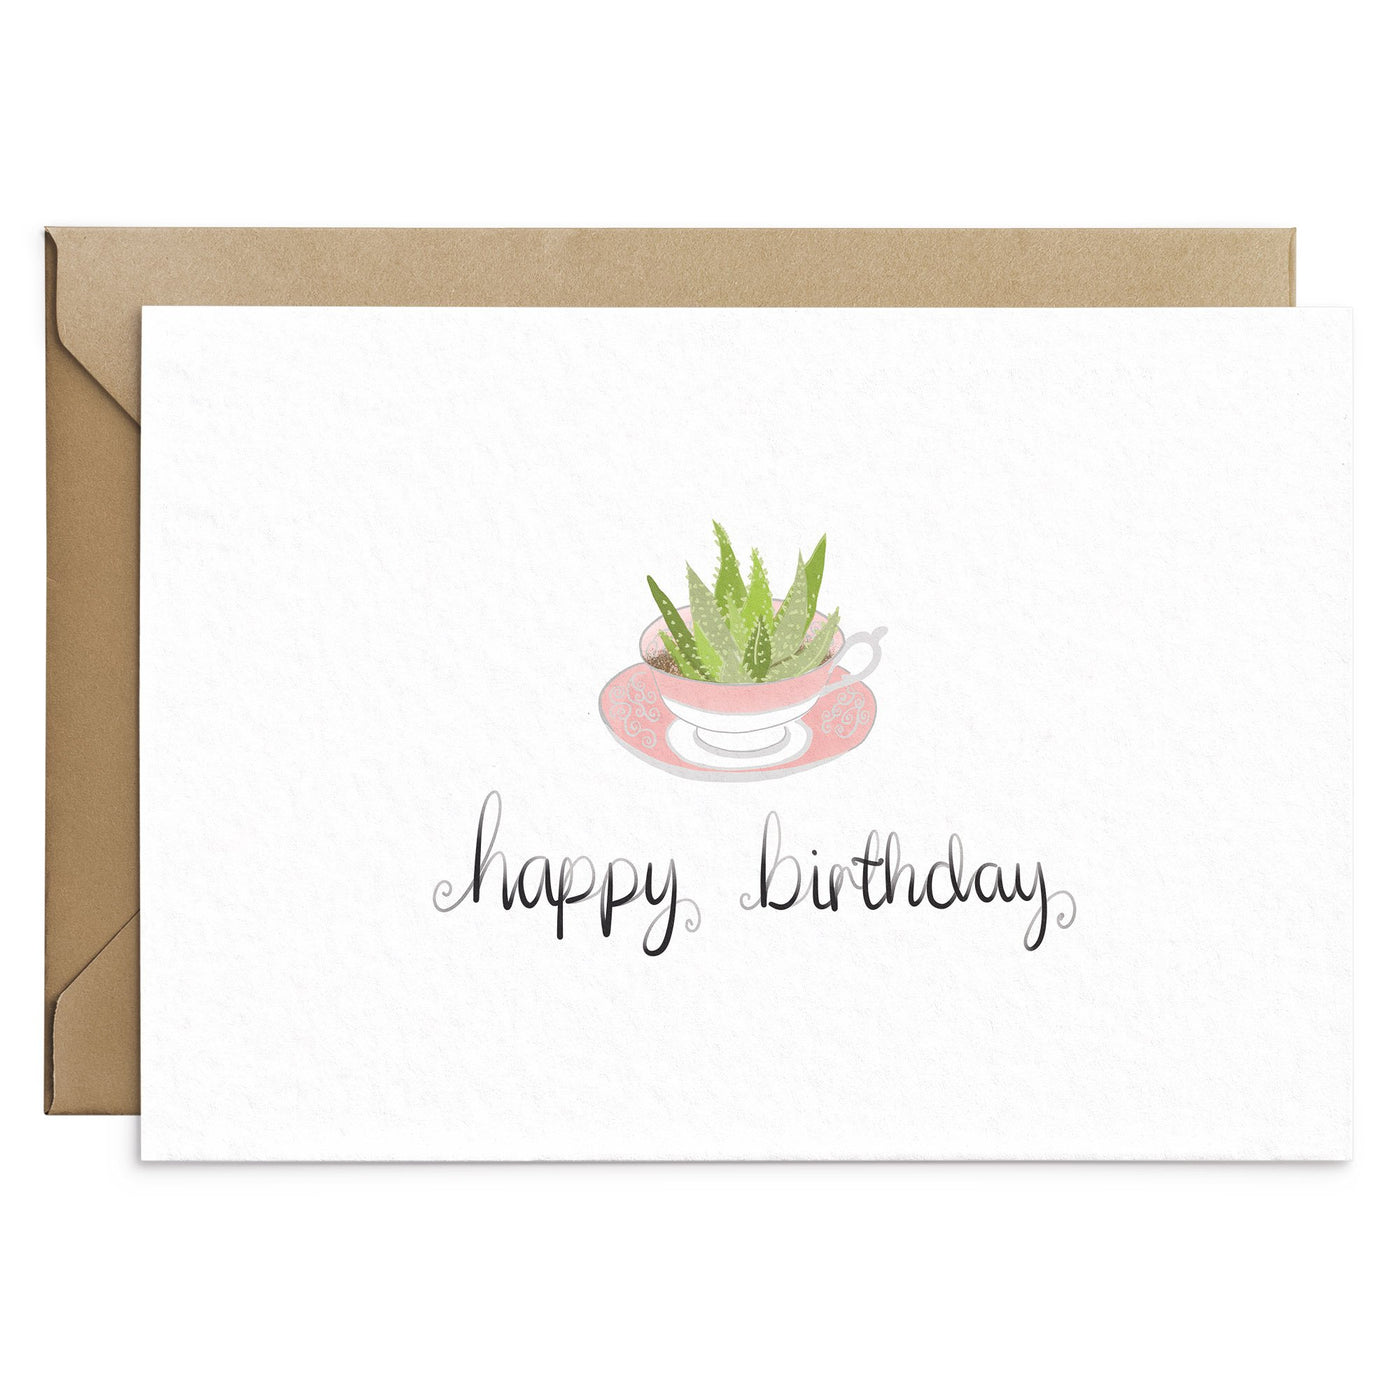 Pink Tea Cup Birthday Card - Poppins & Co.